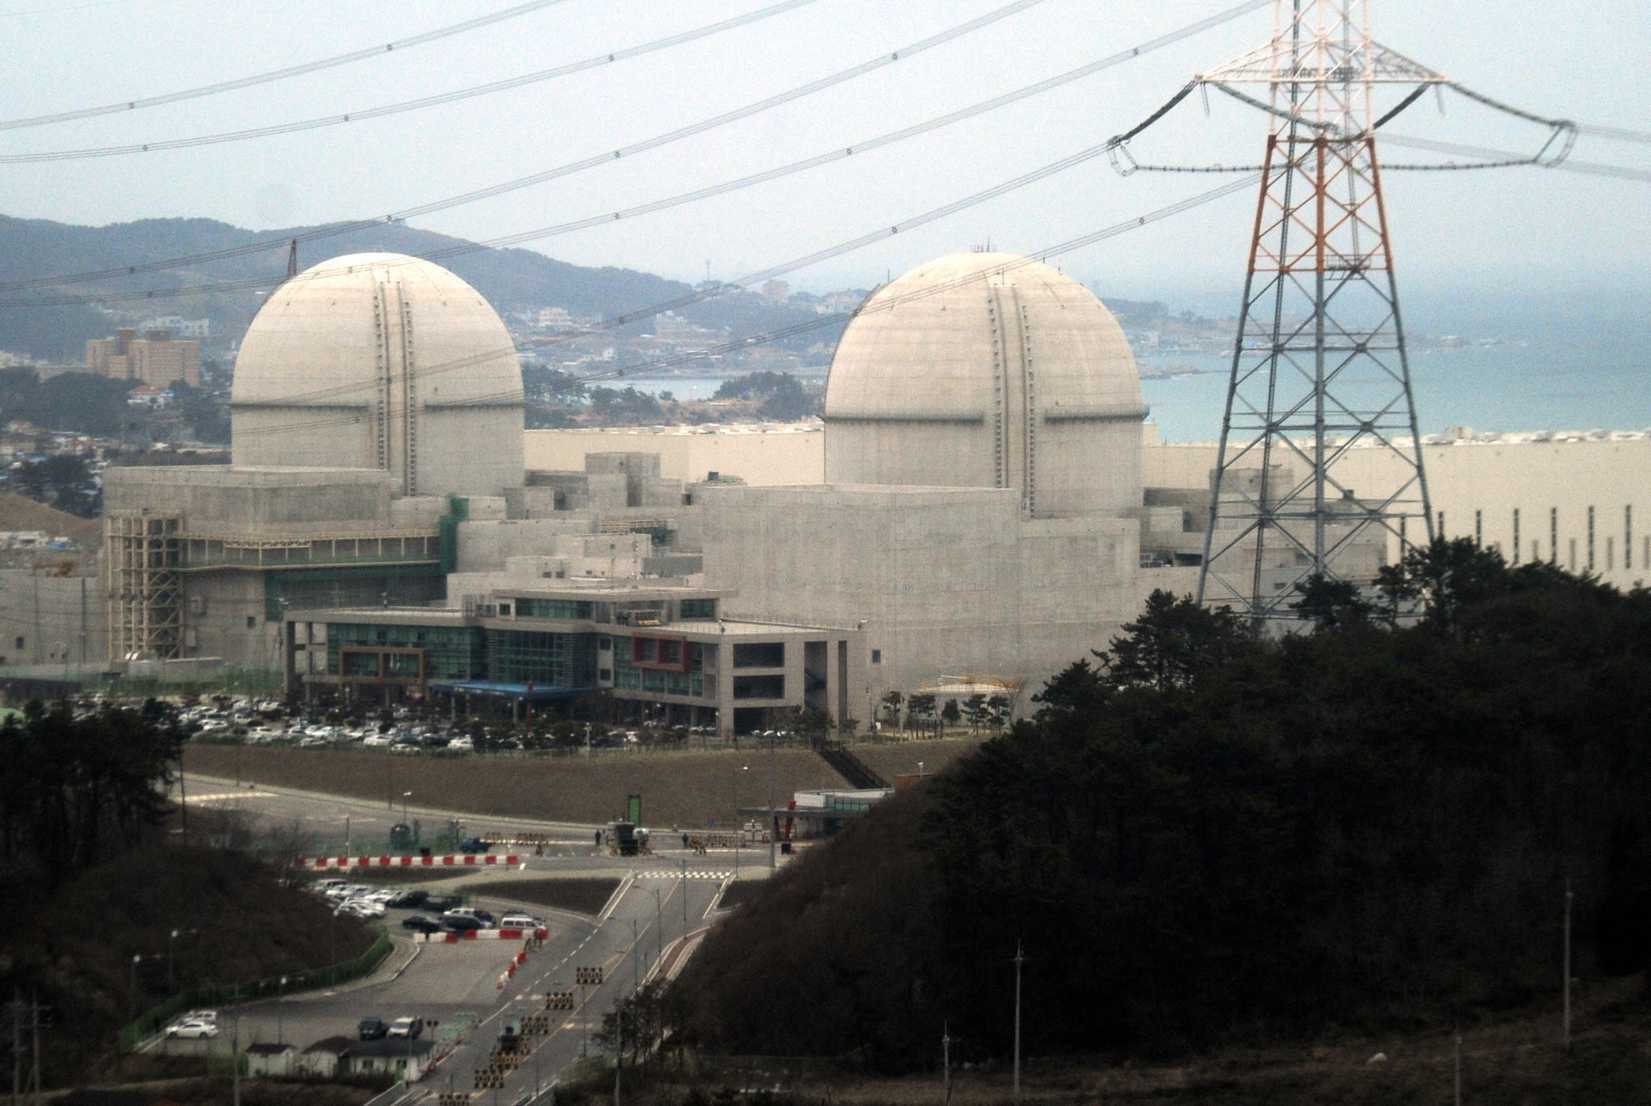 The dome-type Advanced Power Reactor 1400 reactors at the Kori nuclear power plant in Ulsan, South Korea, on Feb. 5, 2013 (Kyodo/AP)